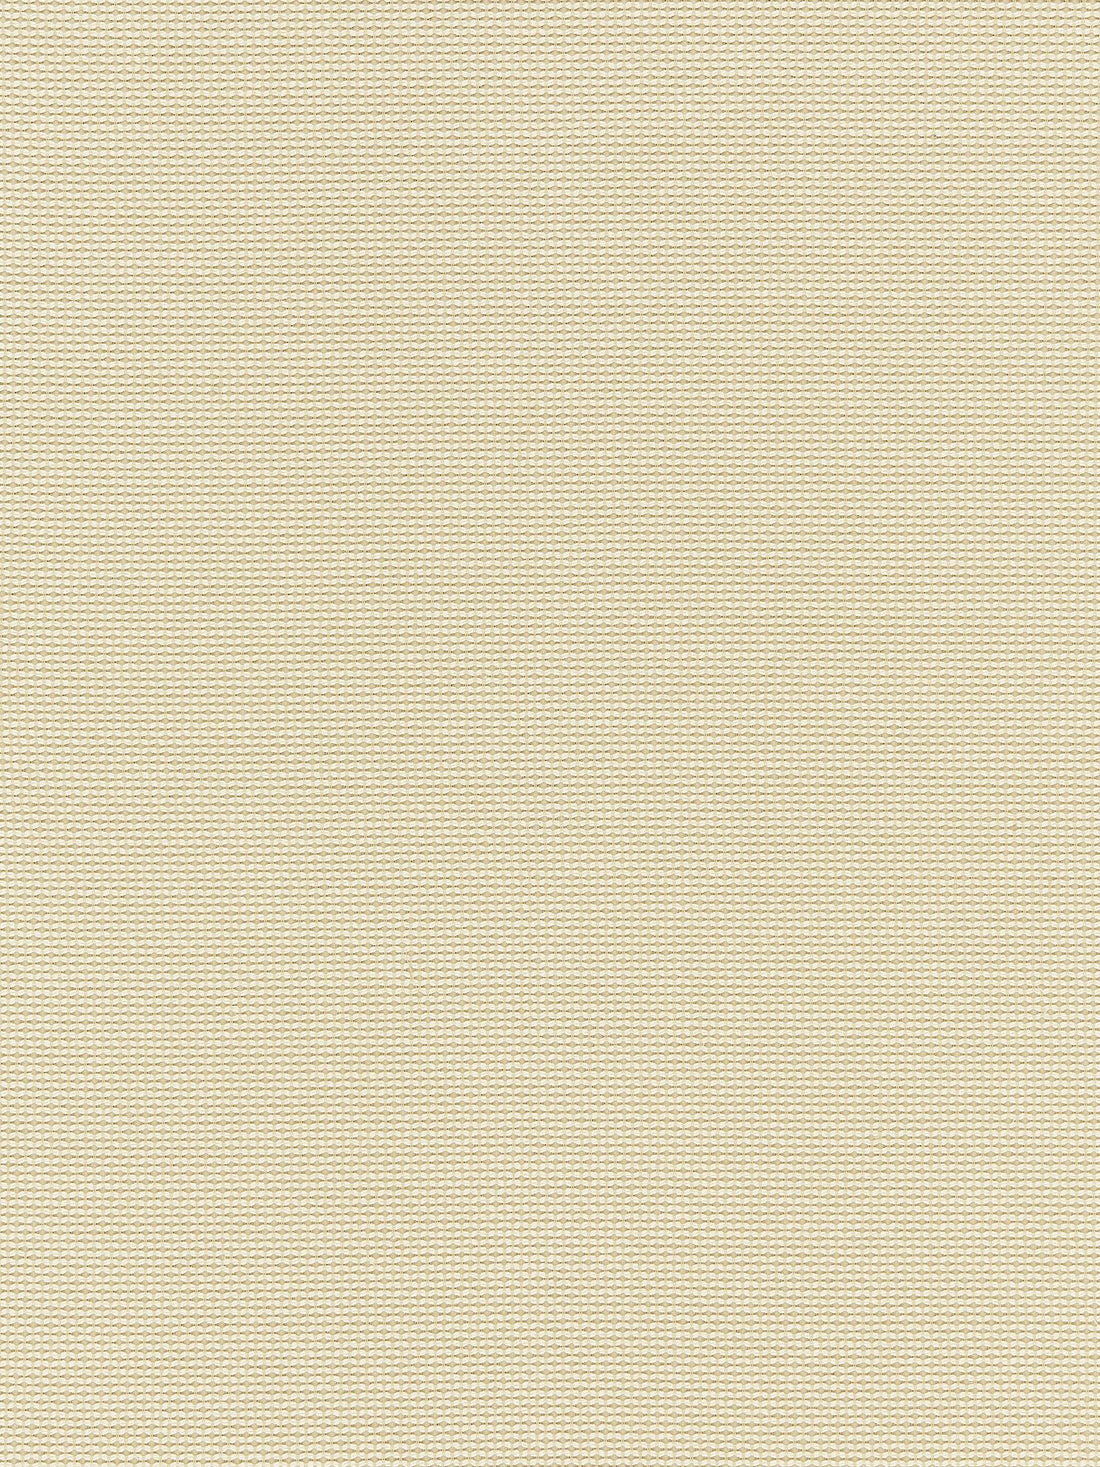 Cortland Weave fabric in sand color - pattern number BK 0002K65119 - by Scalamandre in the Old World Weavers collection